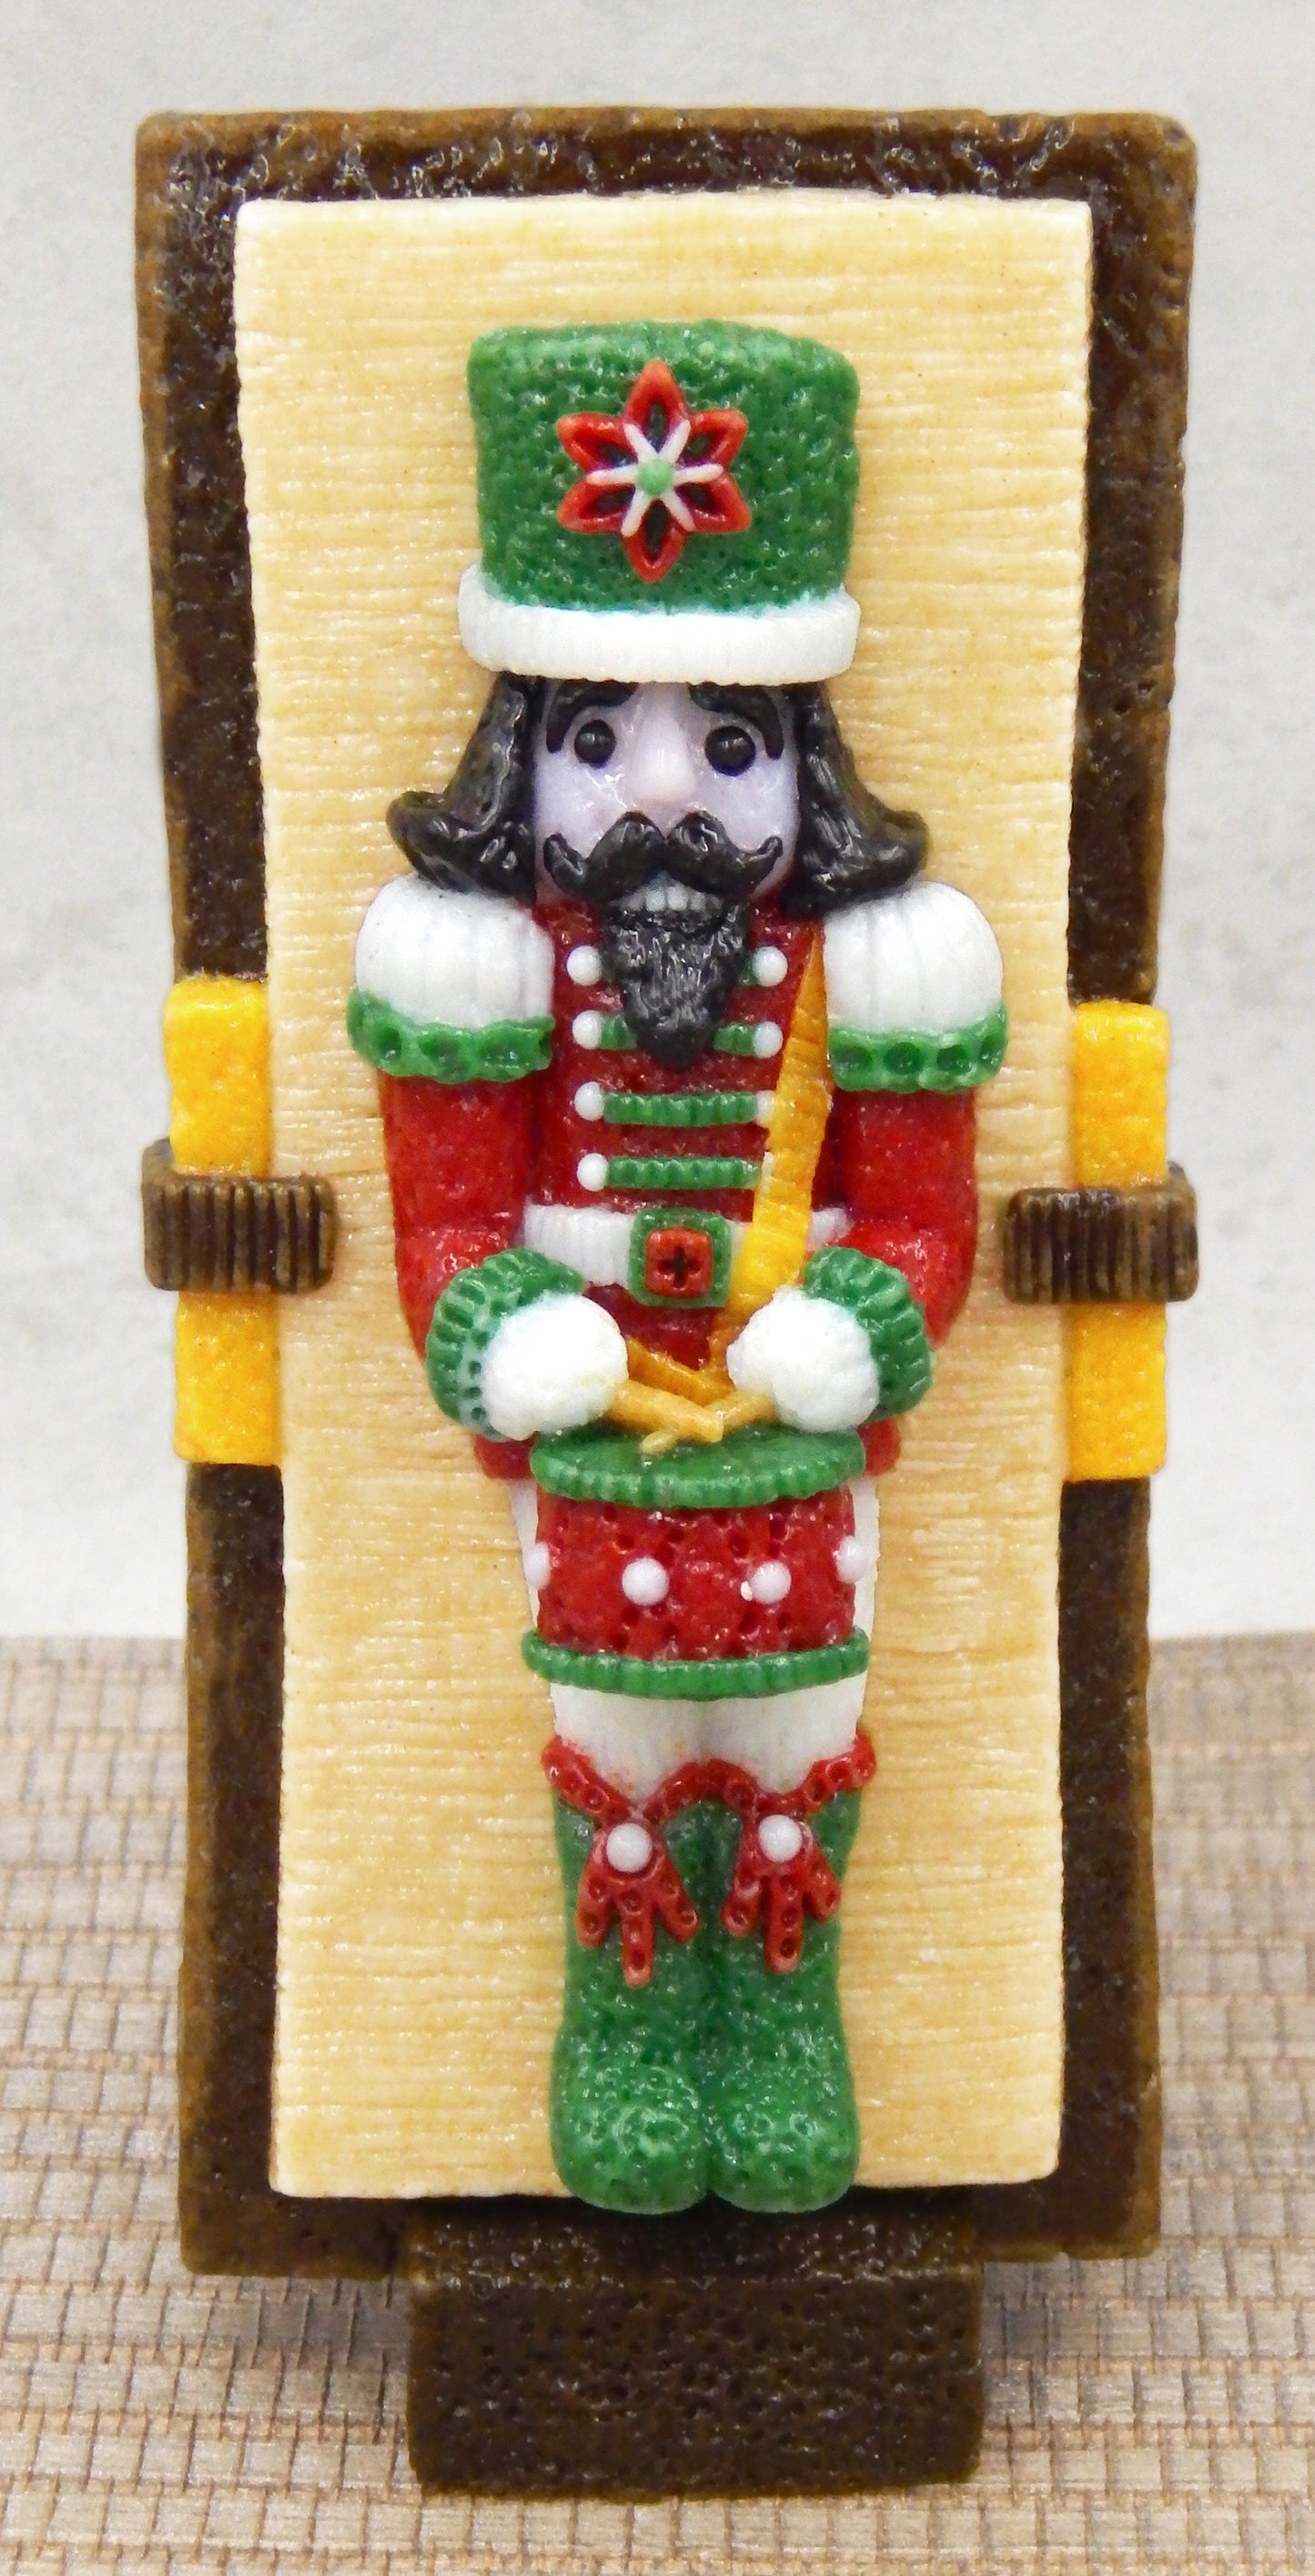 Nutcracker Drummer Collectible Glass Christmas Cookie Treat (78-302)